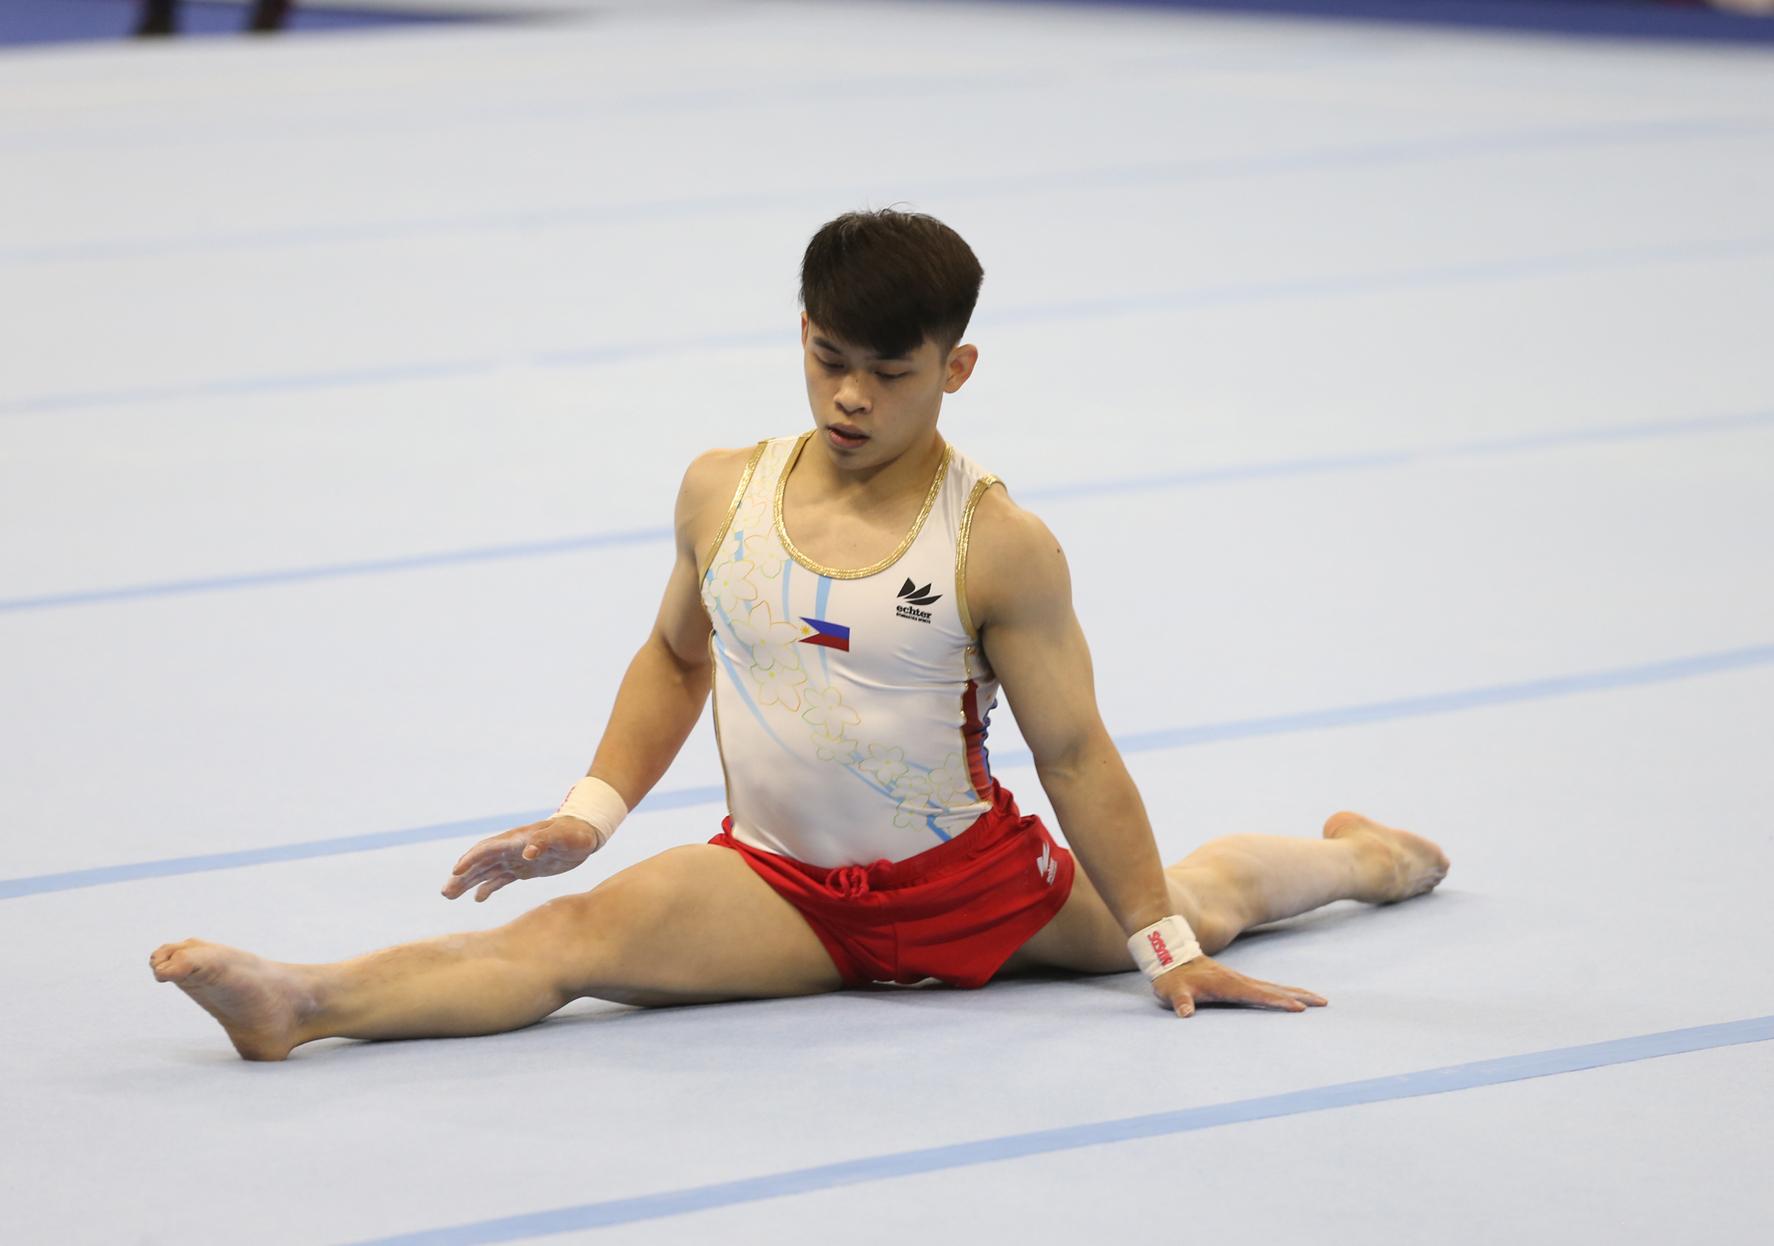 Carlos Yulo showed off his world class gymnastics skills en route to gold.